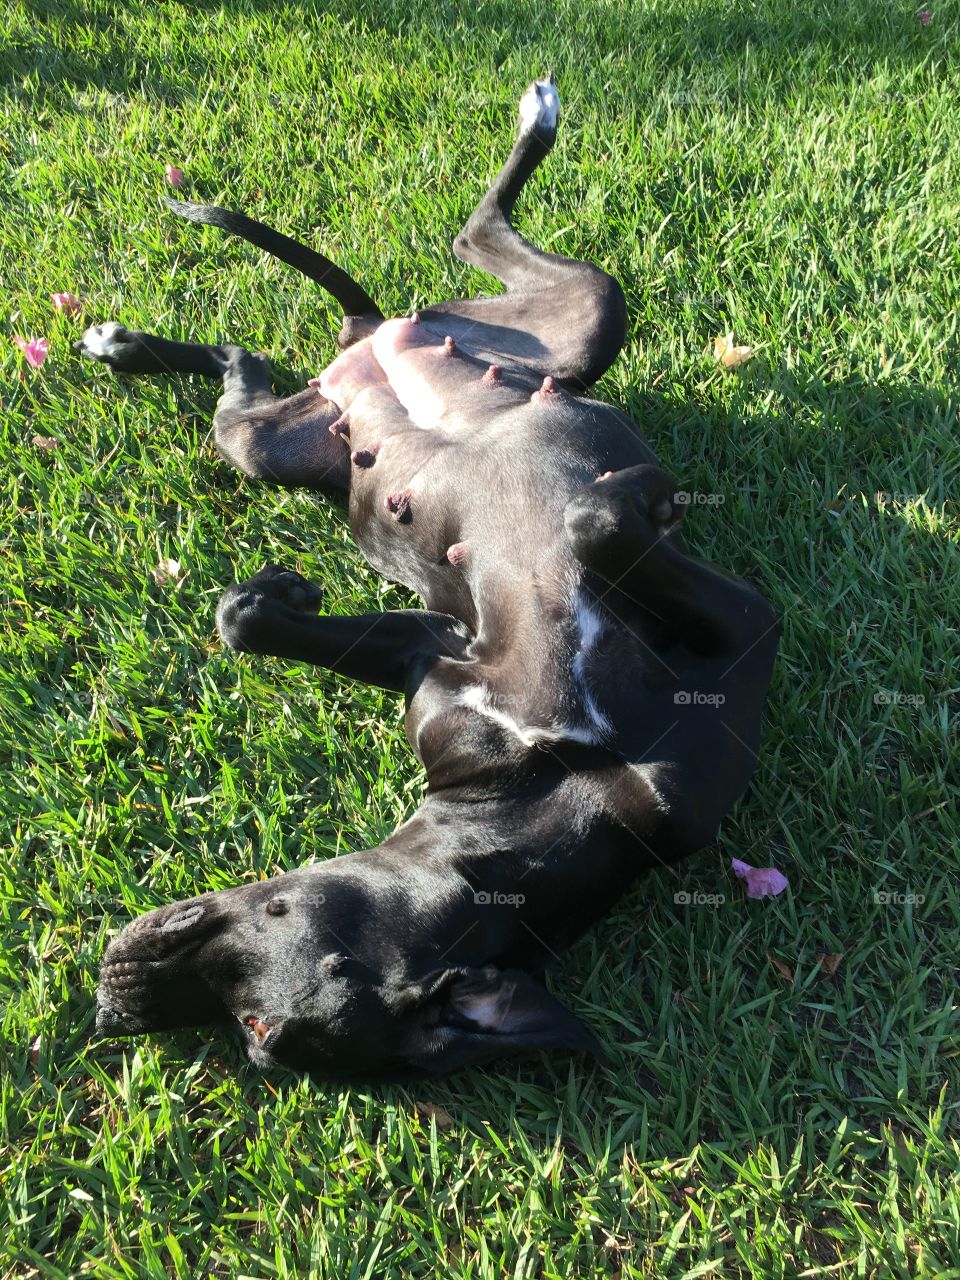 Stretching out on the grass.